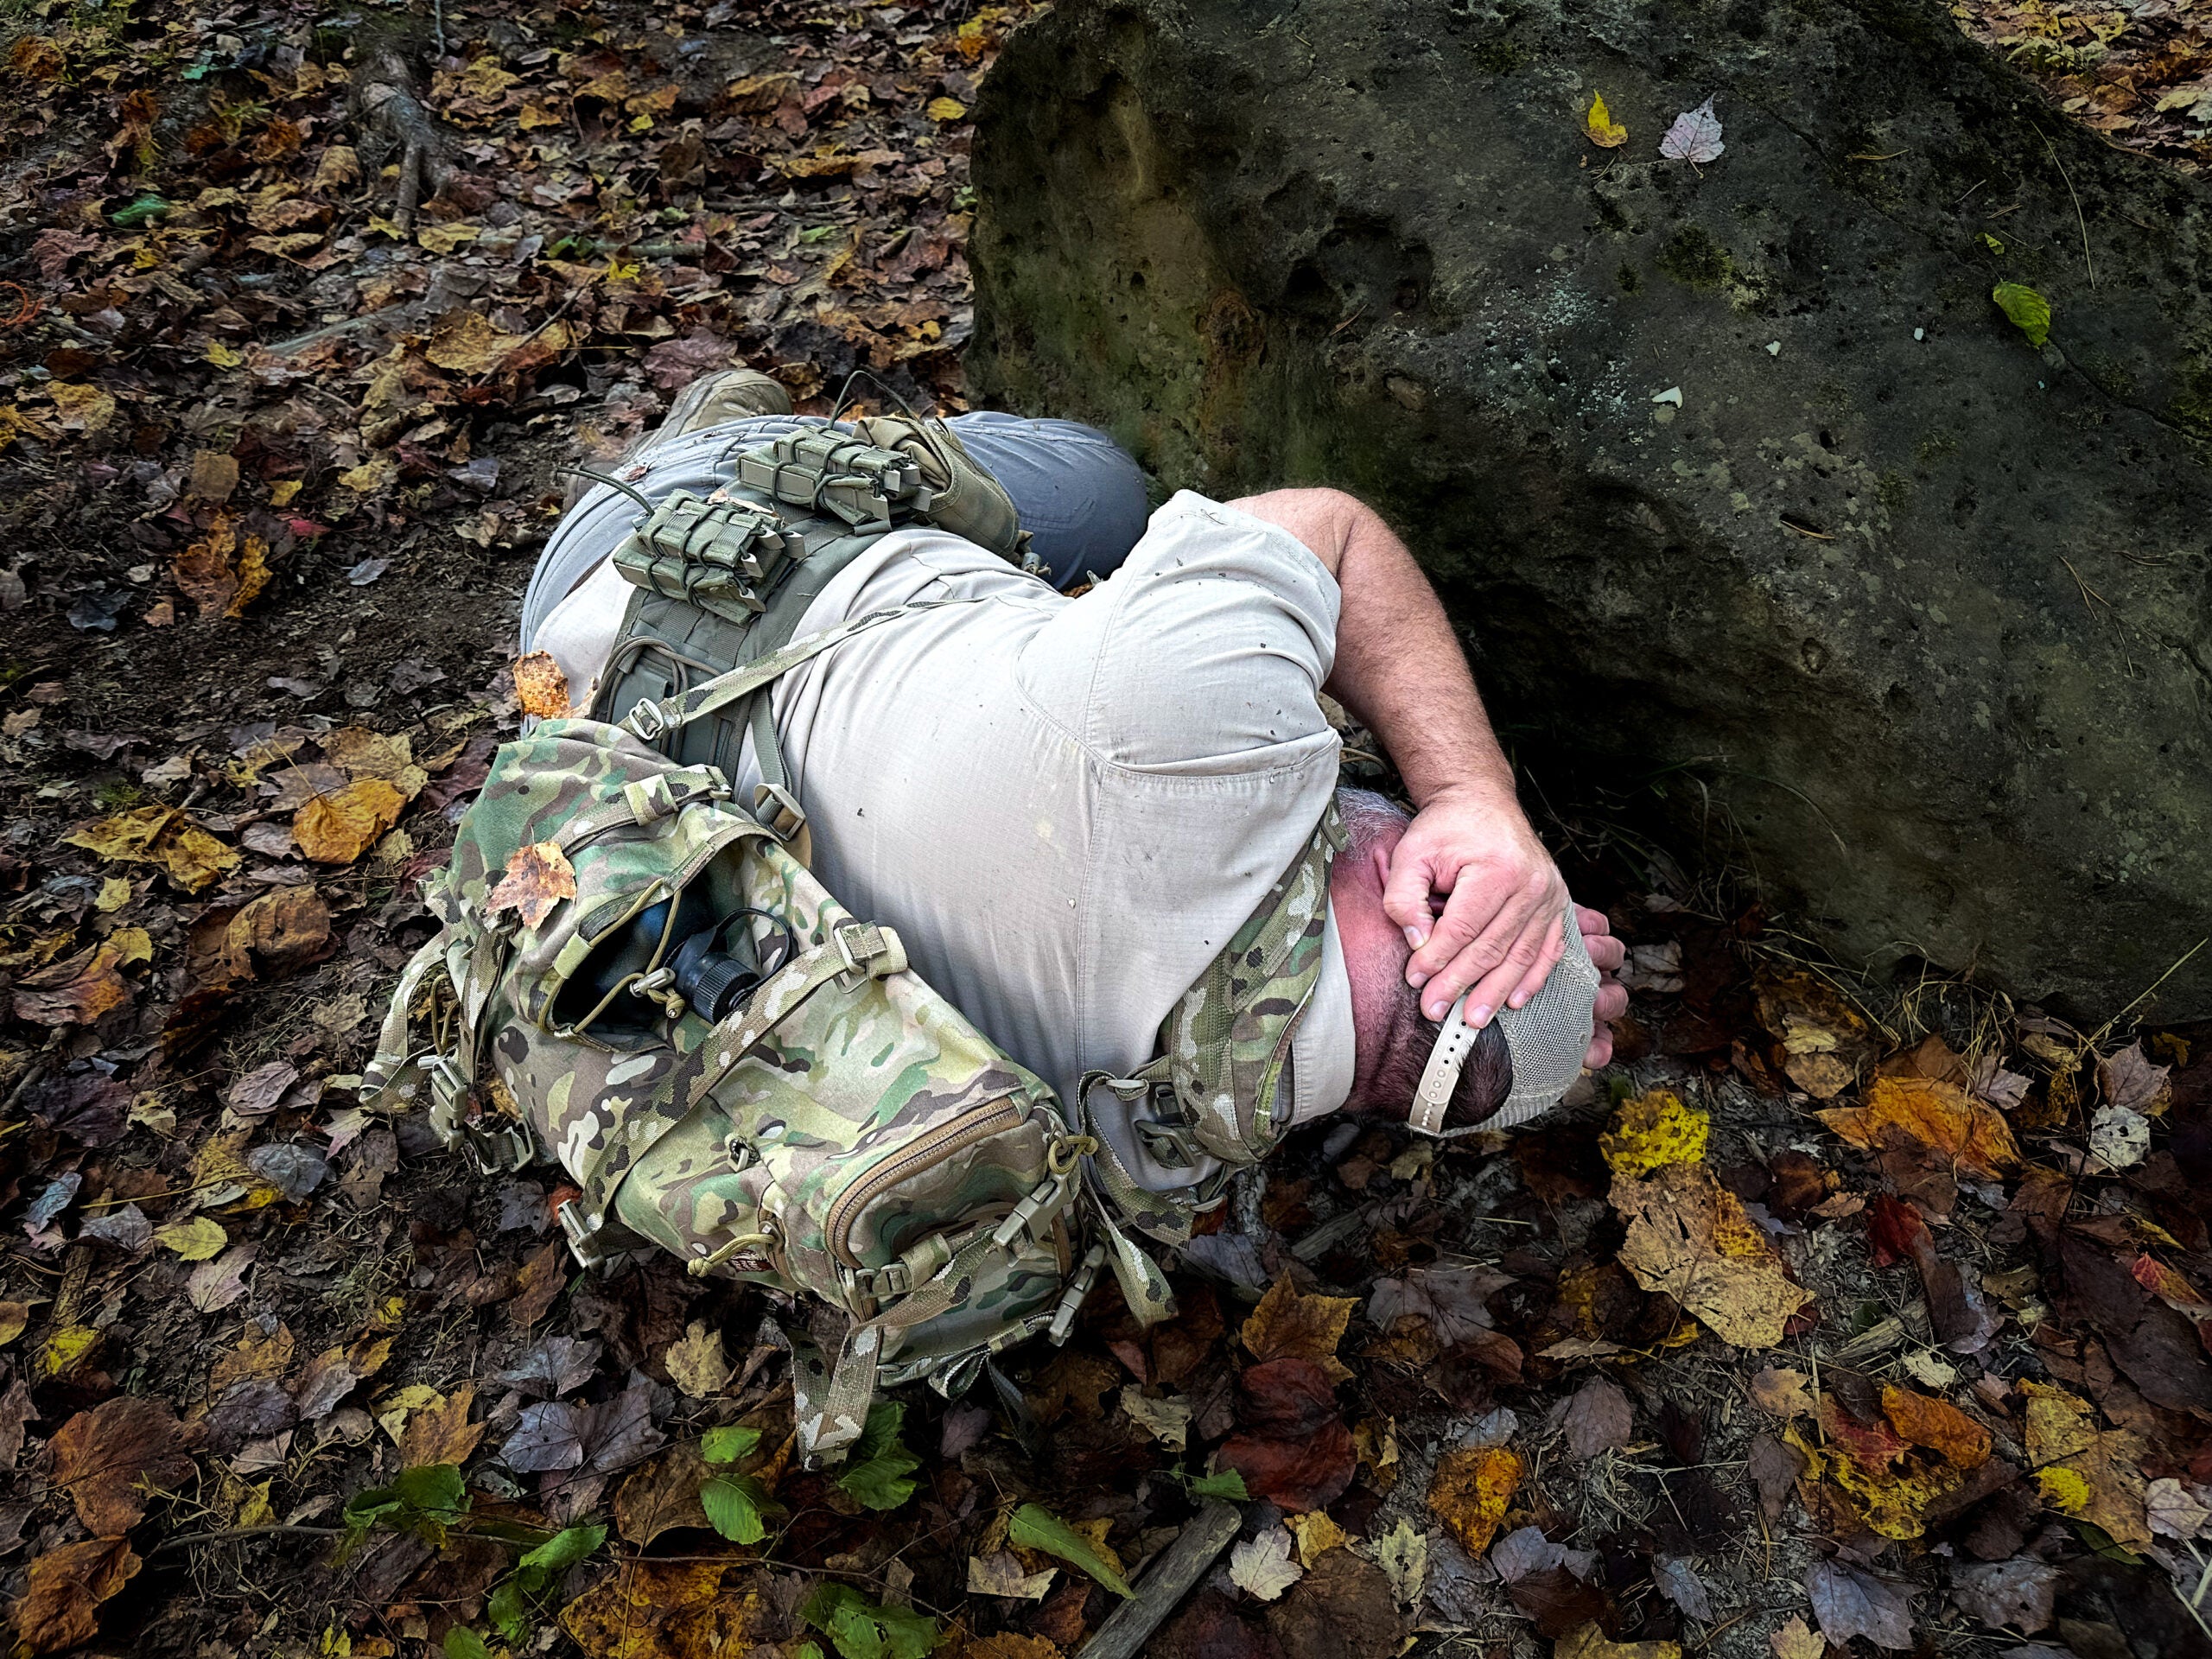 A man pretends to play dead by lying on the ground and covering his head.